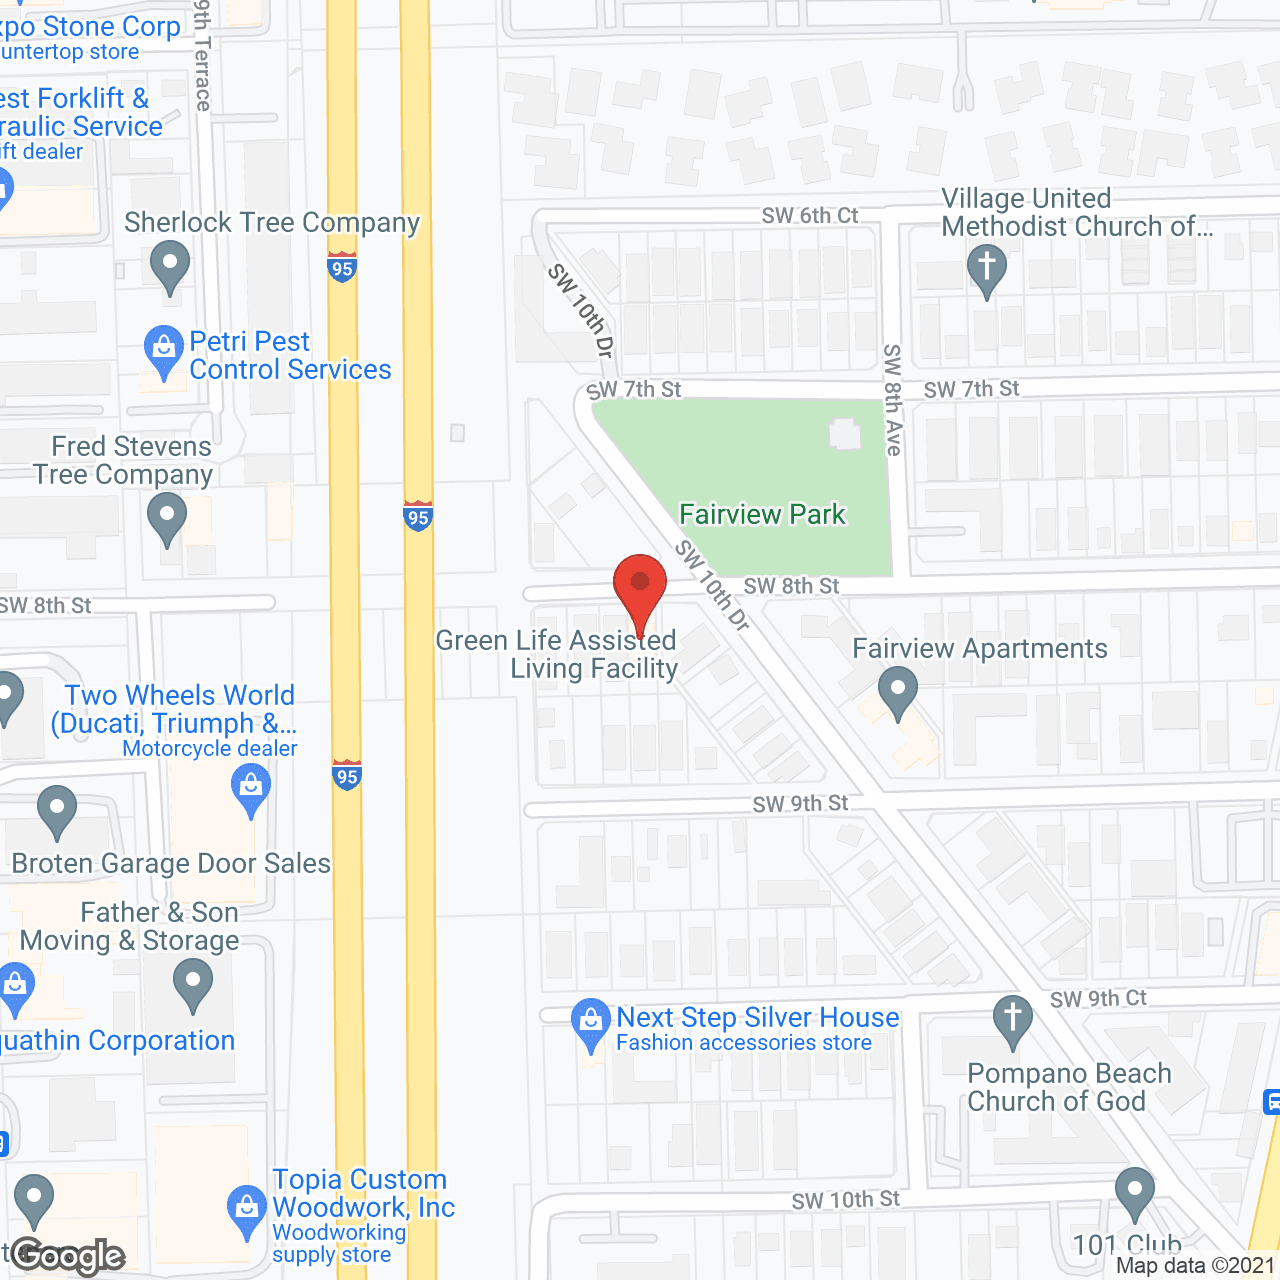 Green Life Assisted Living Facility in google map